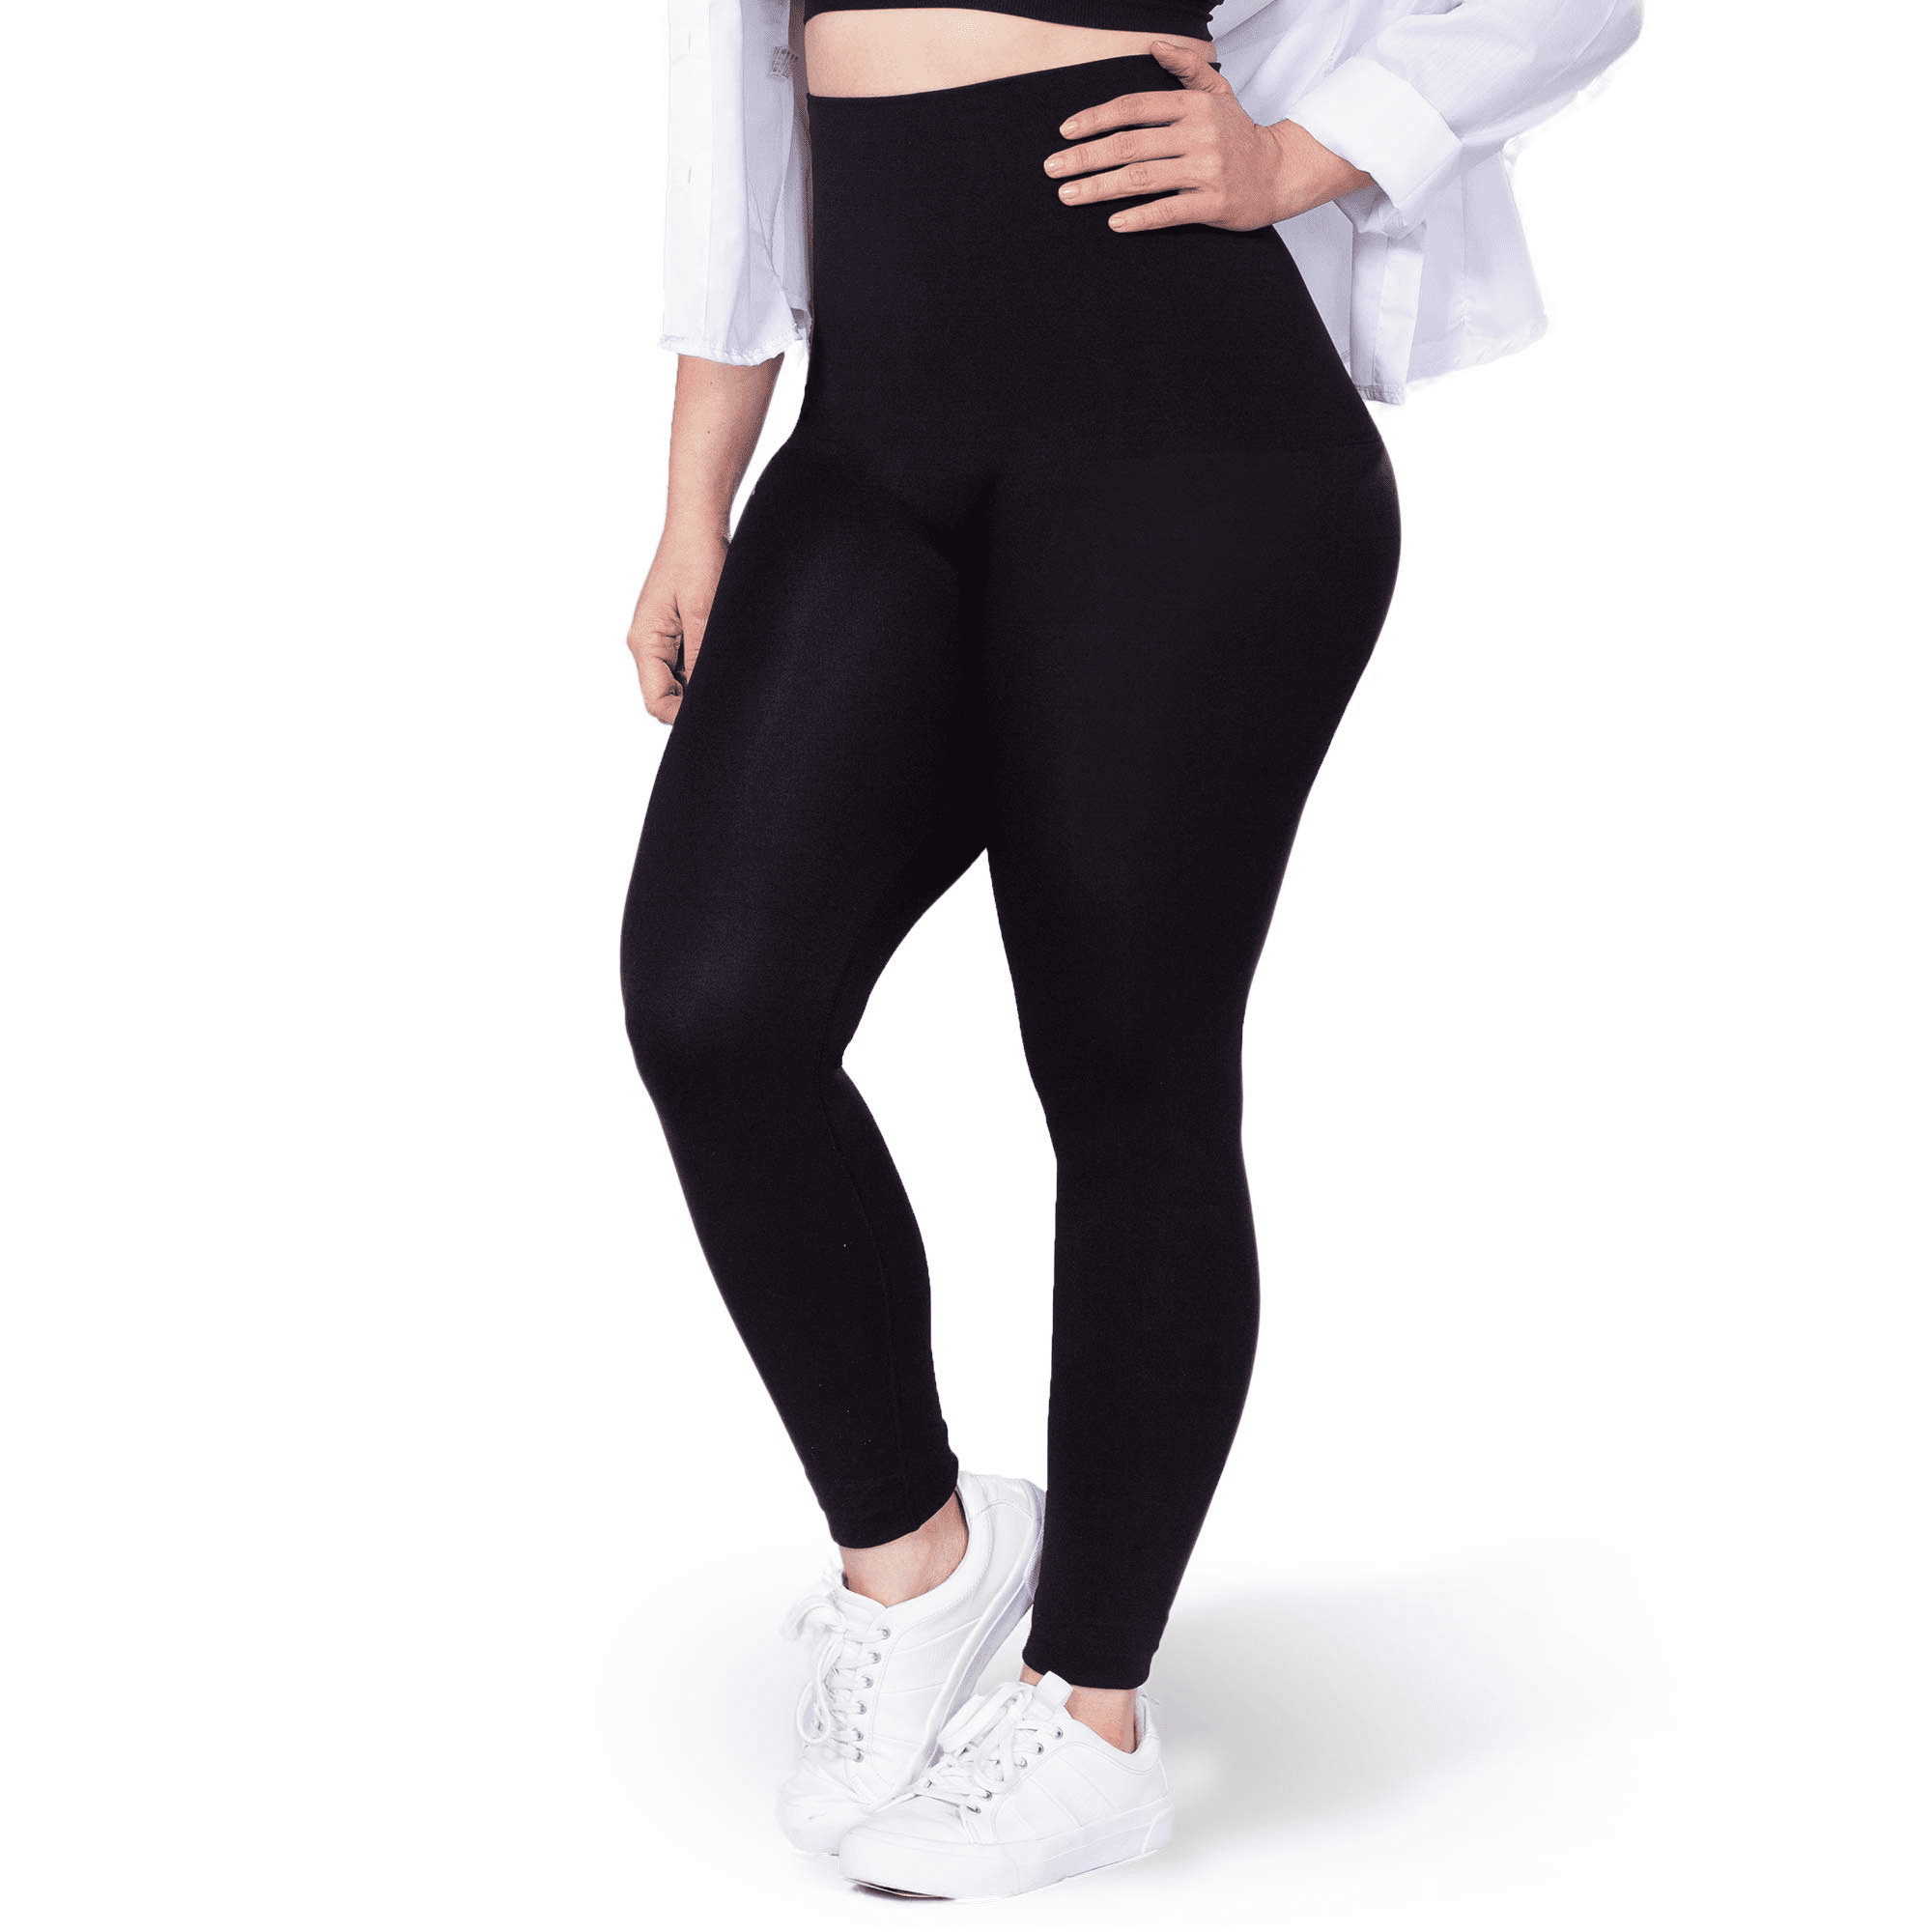 Thick High Waist Tummy Compression Slimming Leggings Women's Yoga Pants  Tummy Control Naked Feeling Workout Leggings 